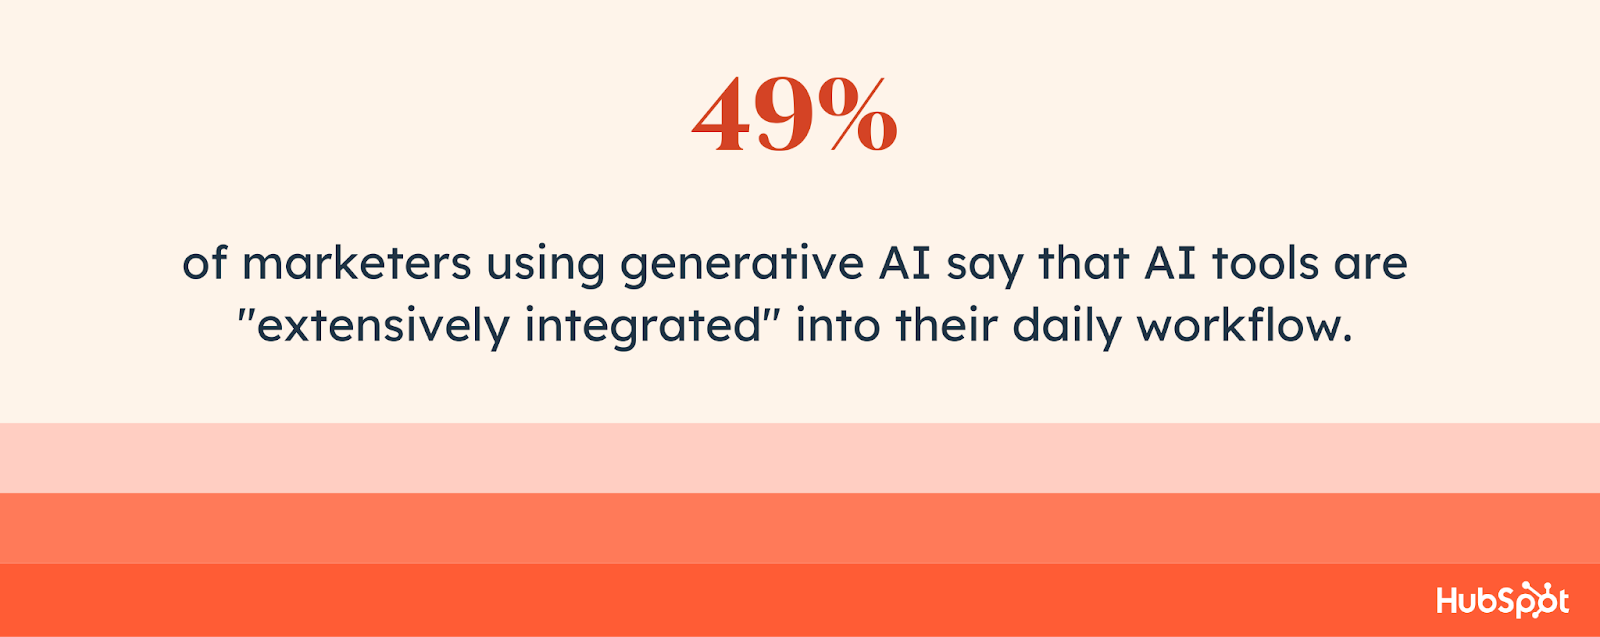 49% of marketers using generative AI say that AI tools are “extensively integrated” in their daily workflow.